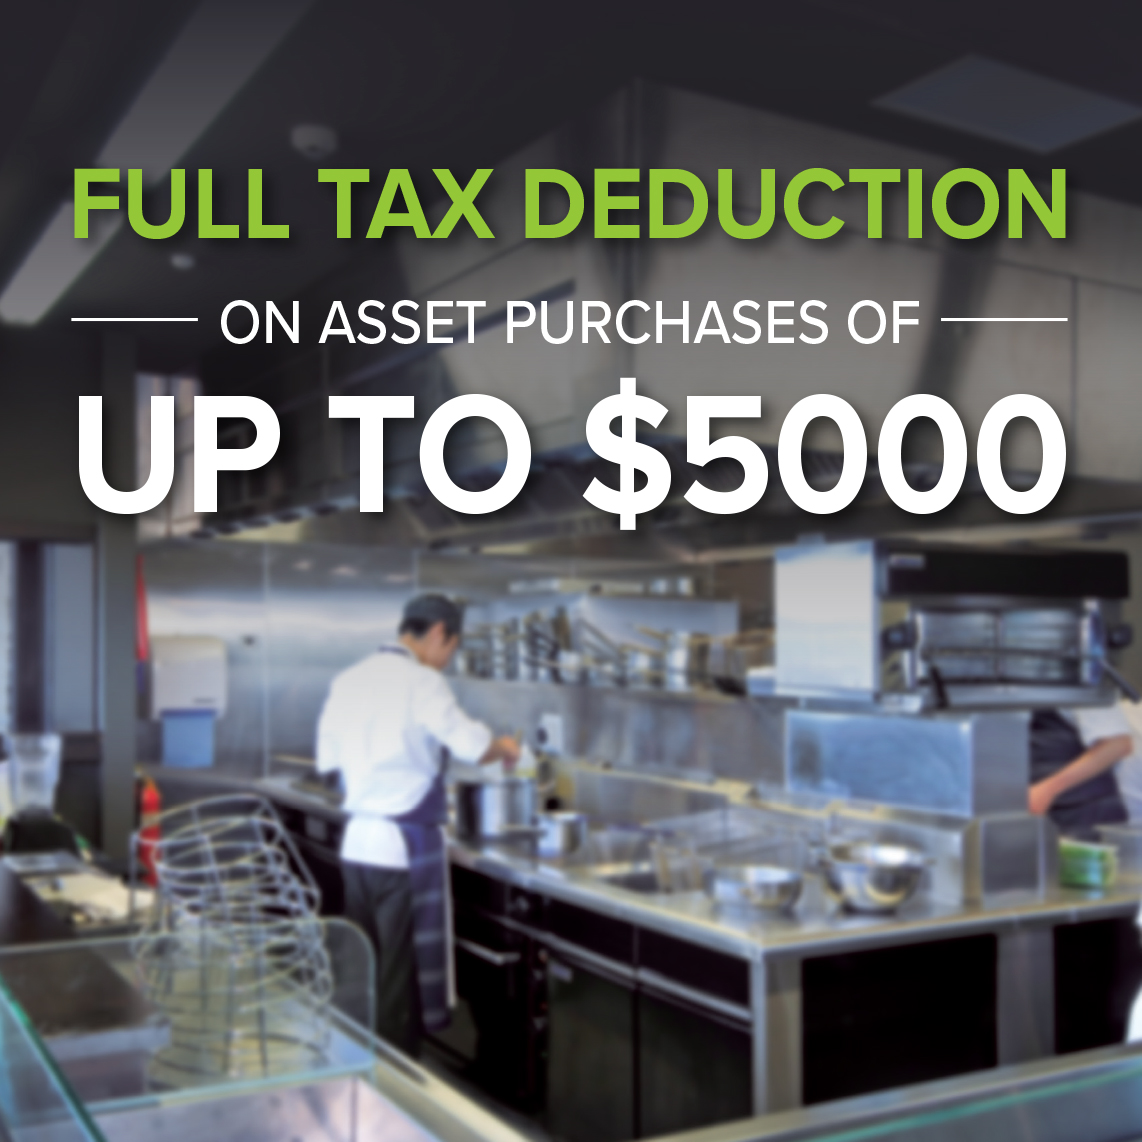 Full tax deduction on asset purchases